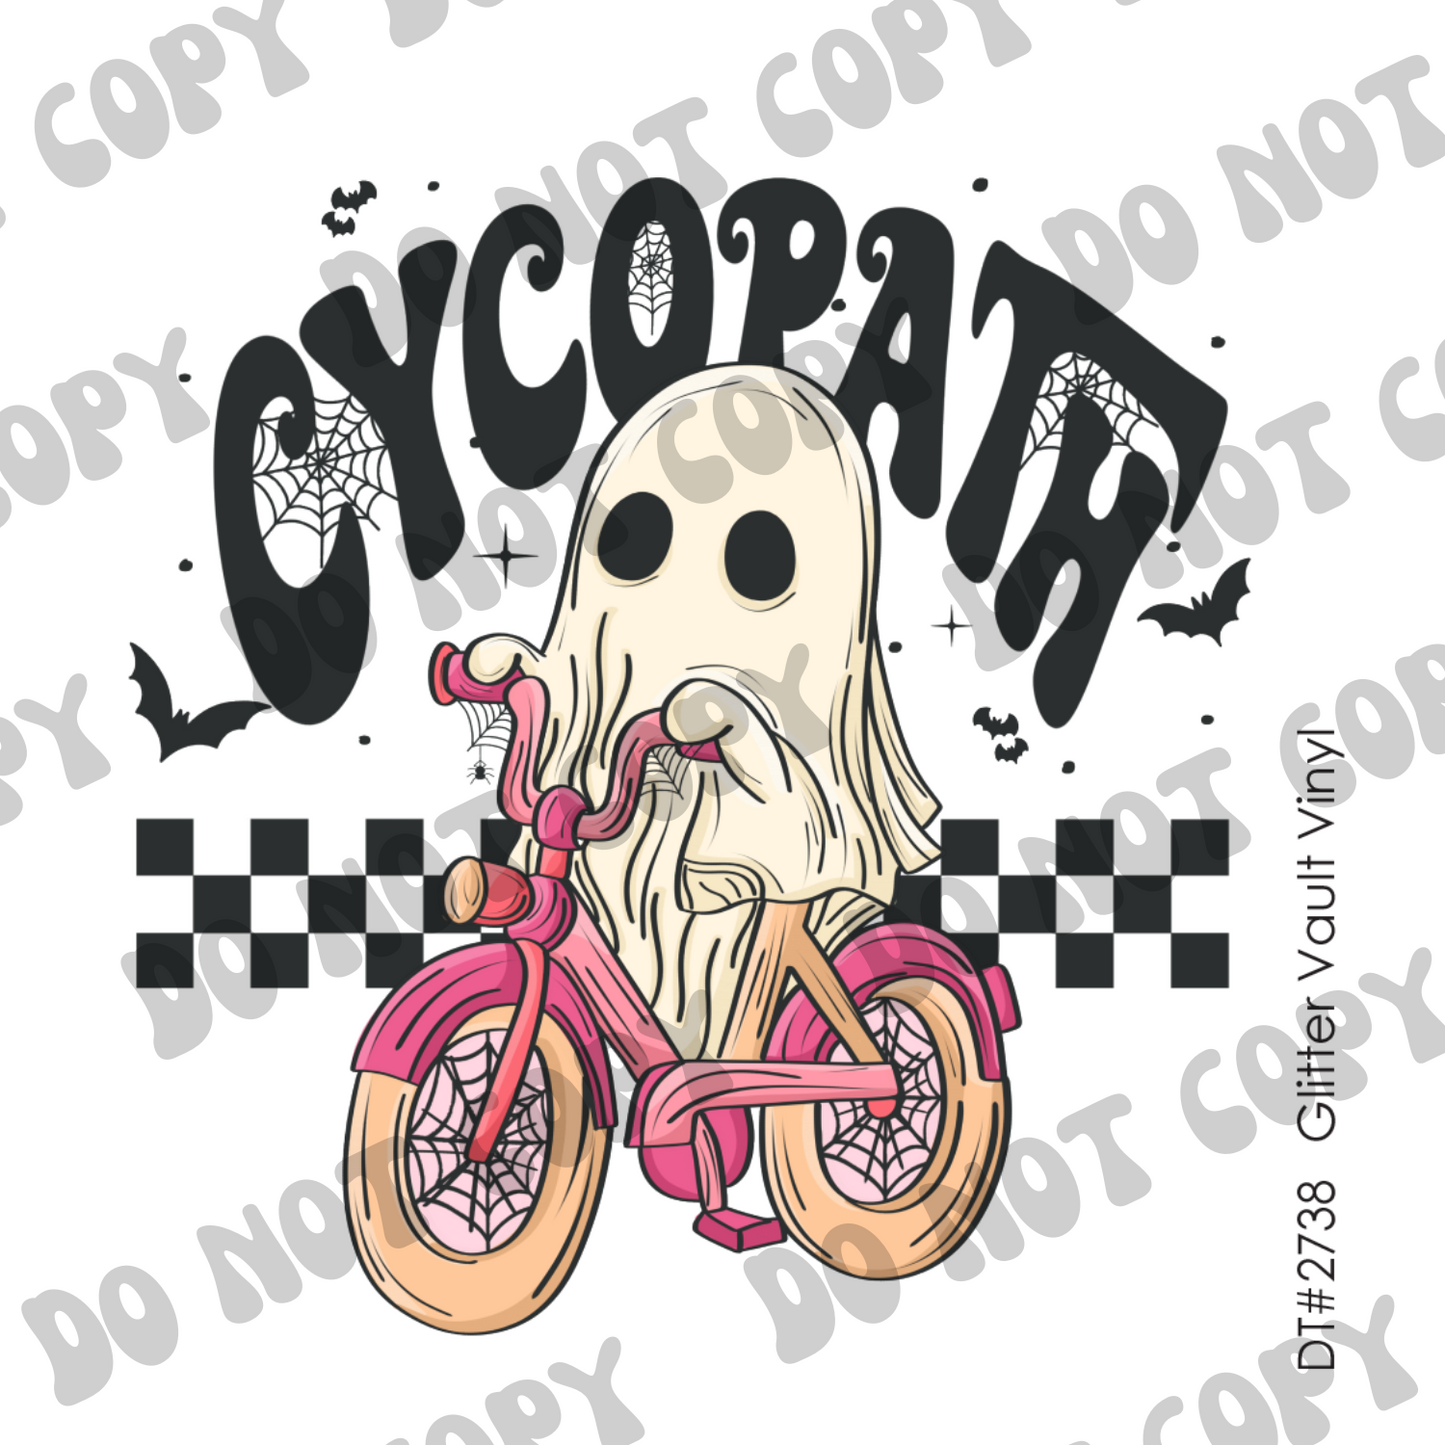 DT# 2738 - Cycopath - Transparent Decal